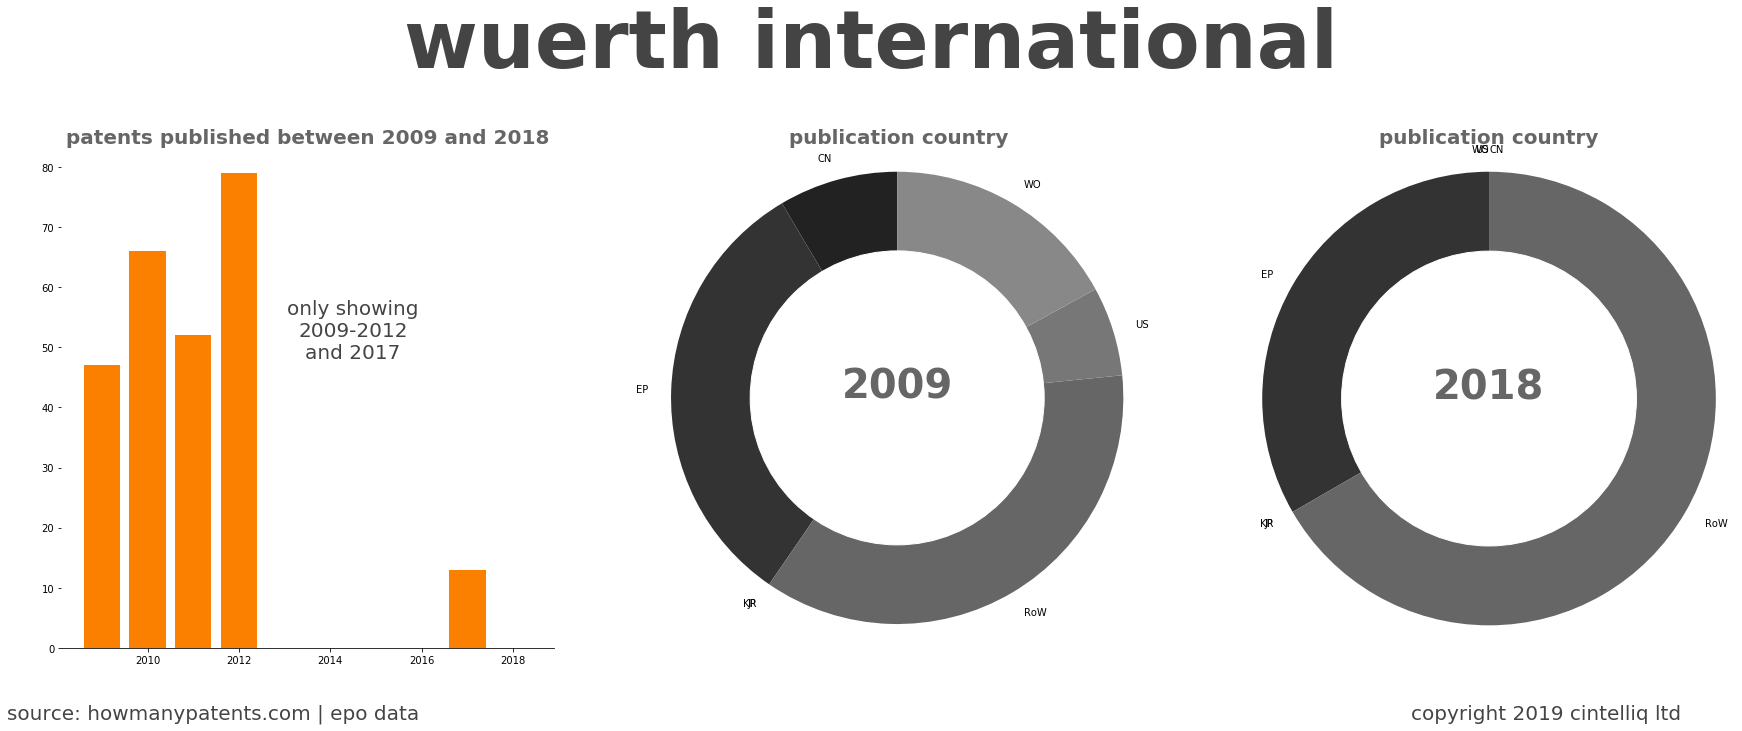 summary of patents for Wuerth International